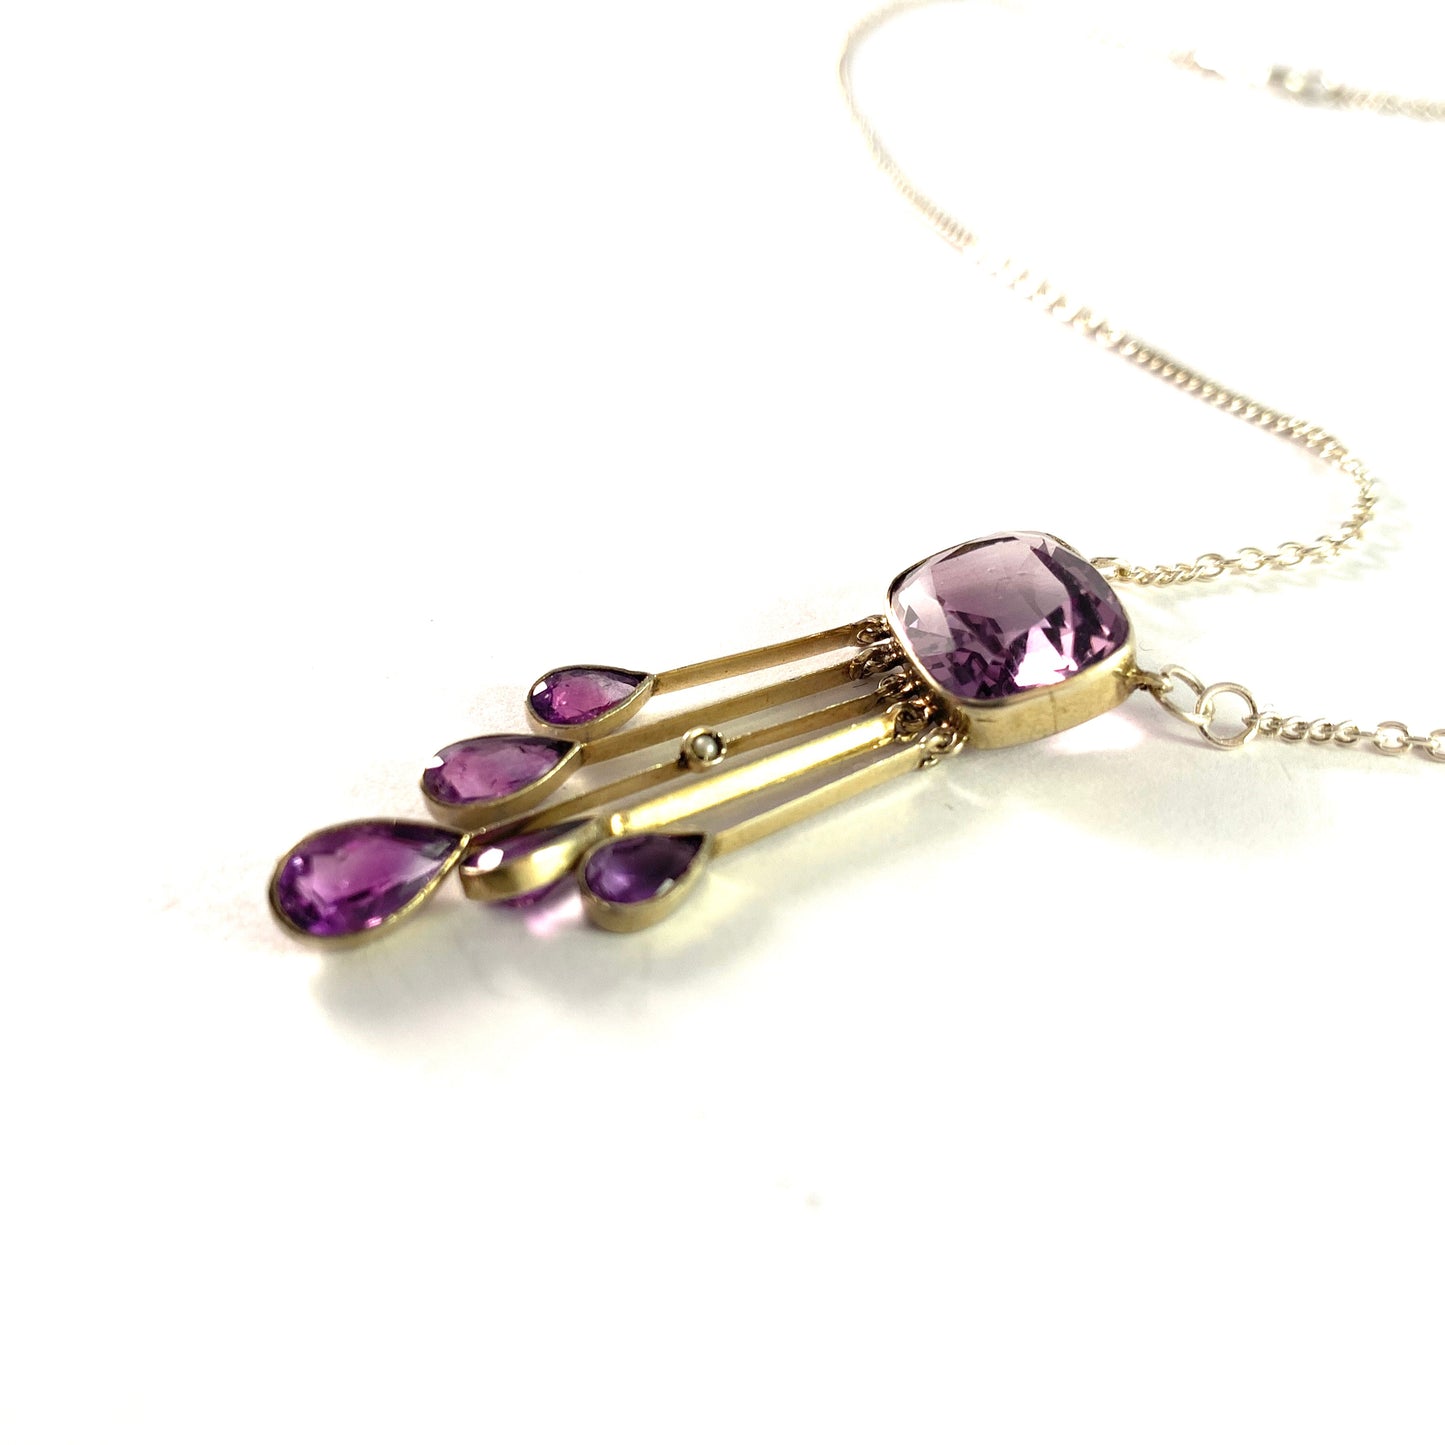 Antique Silver Amethyst Negligee Pendant With Later Silver Chain.